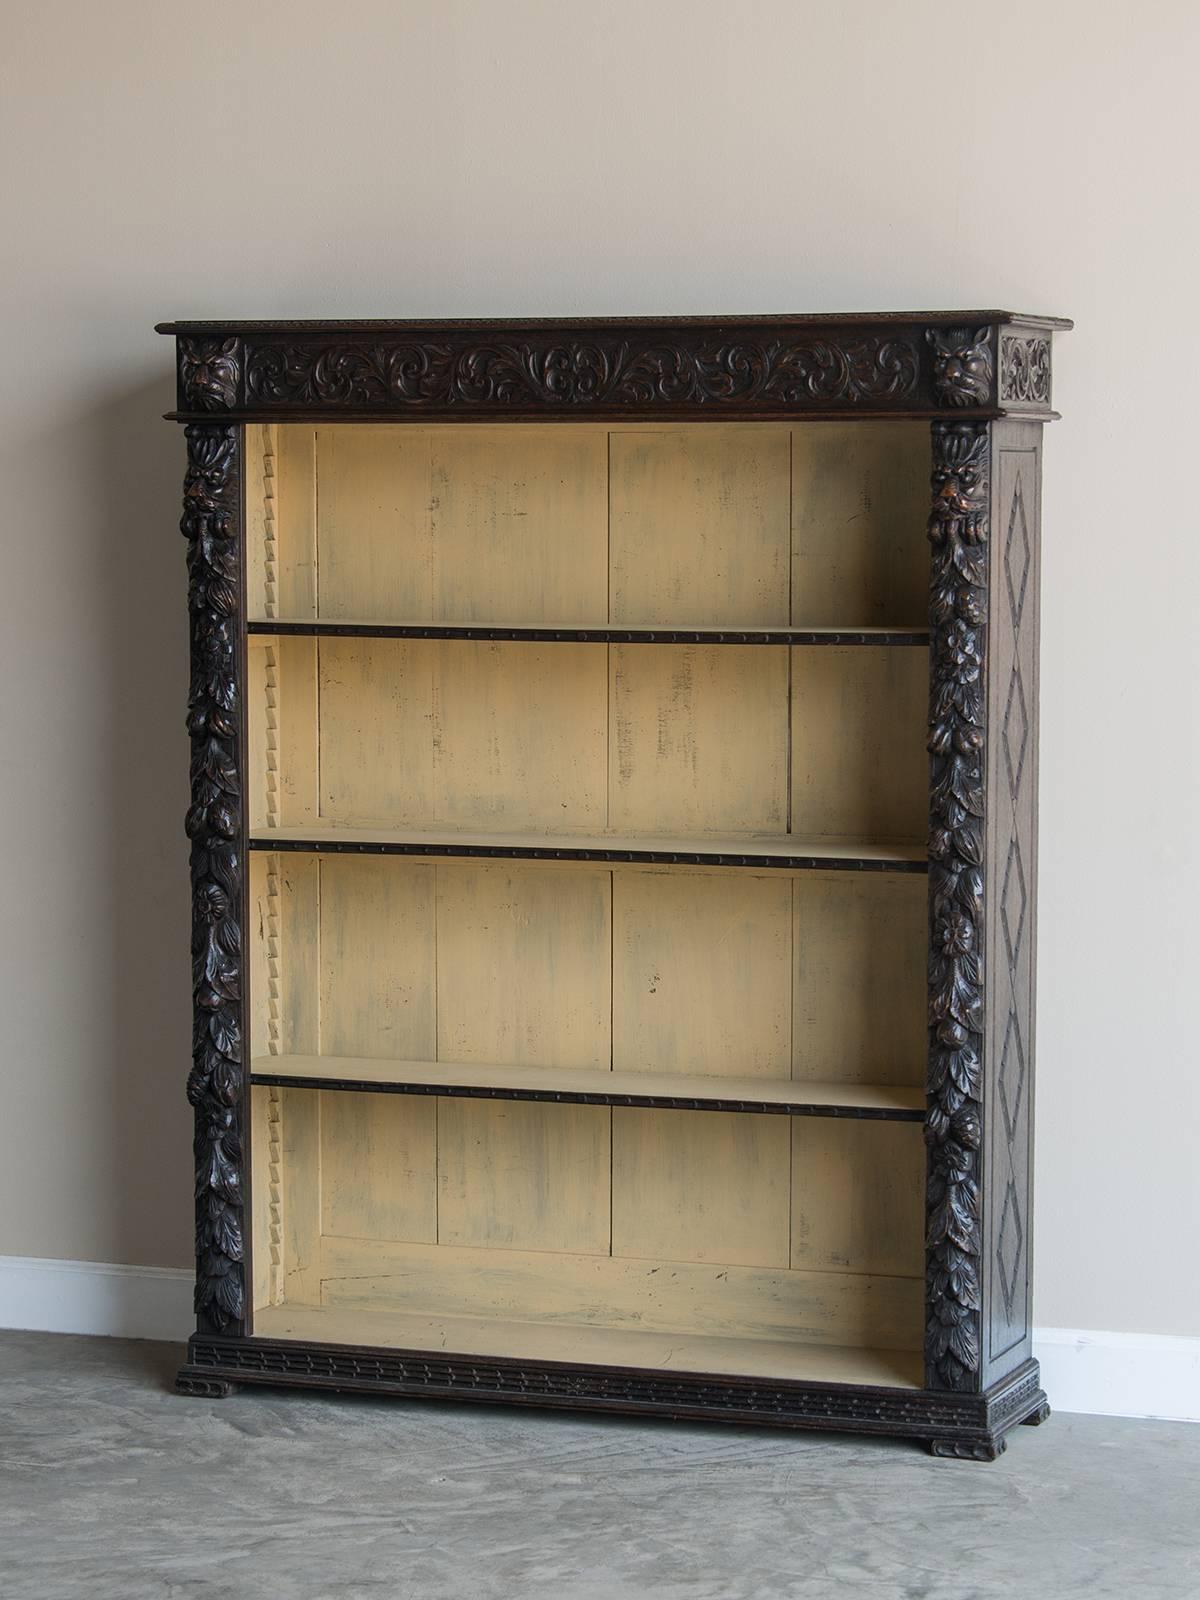 Late 19th Century Antique English Carved Oak Bookcase Display Cabinet, circa 1890